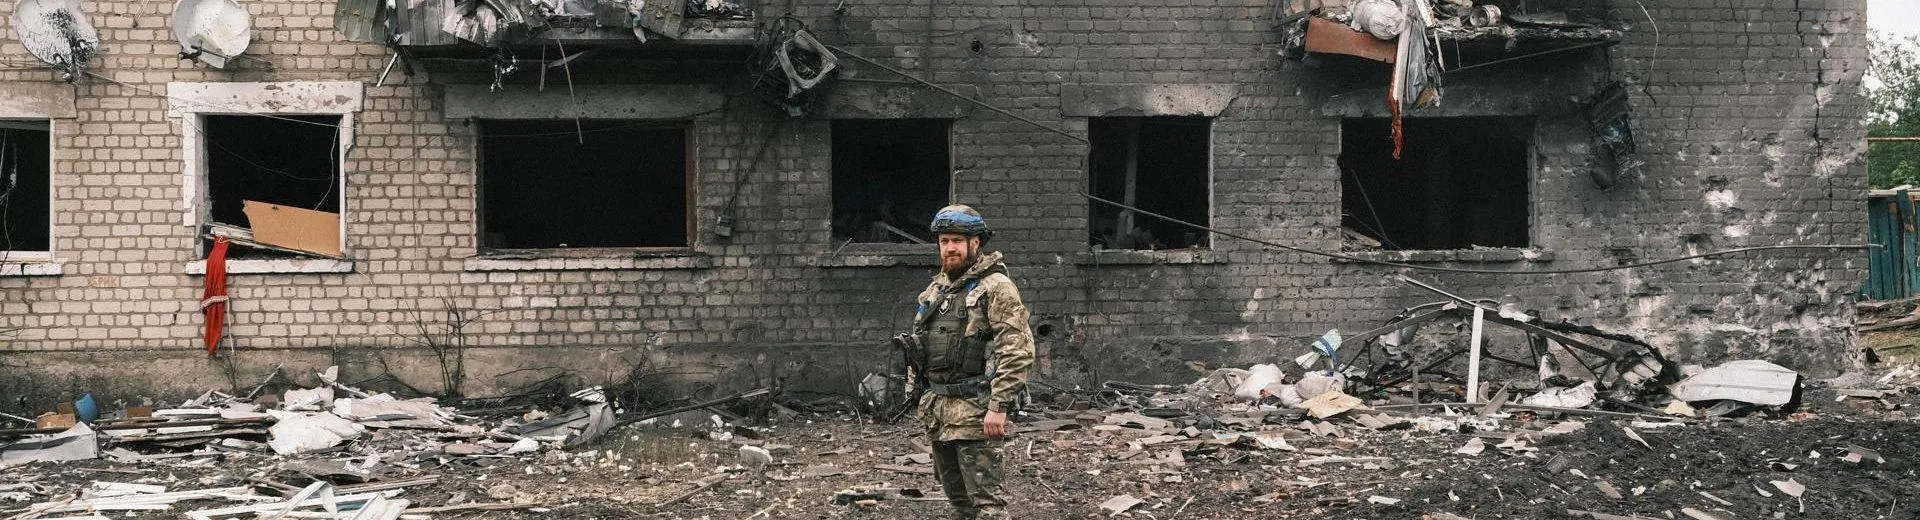 A soldier poses in front of the charred remains of a building on the outskirts of Kharkiv.